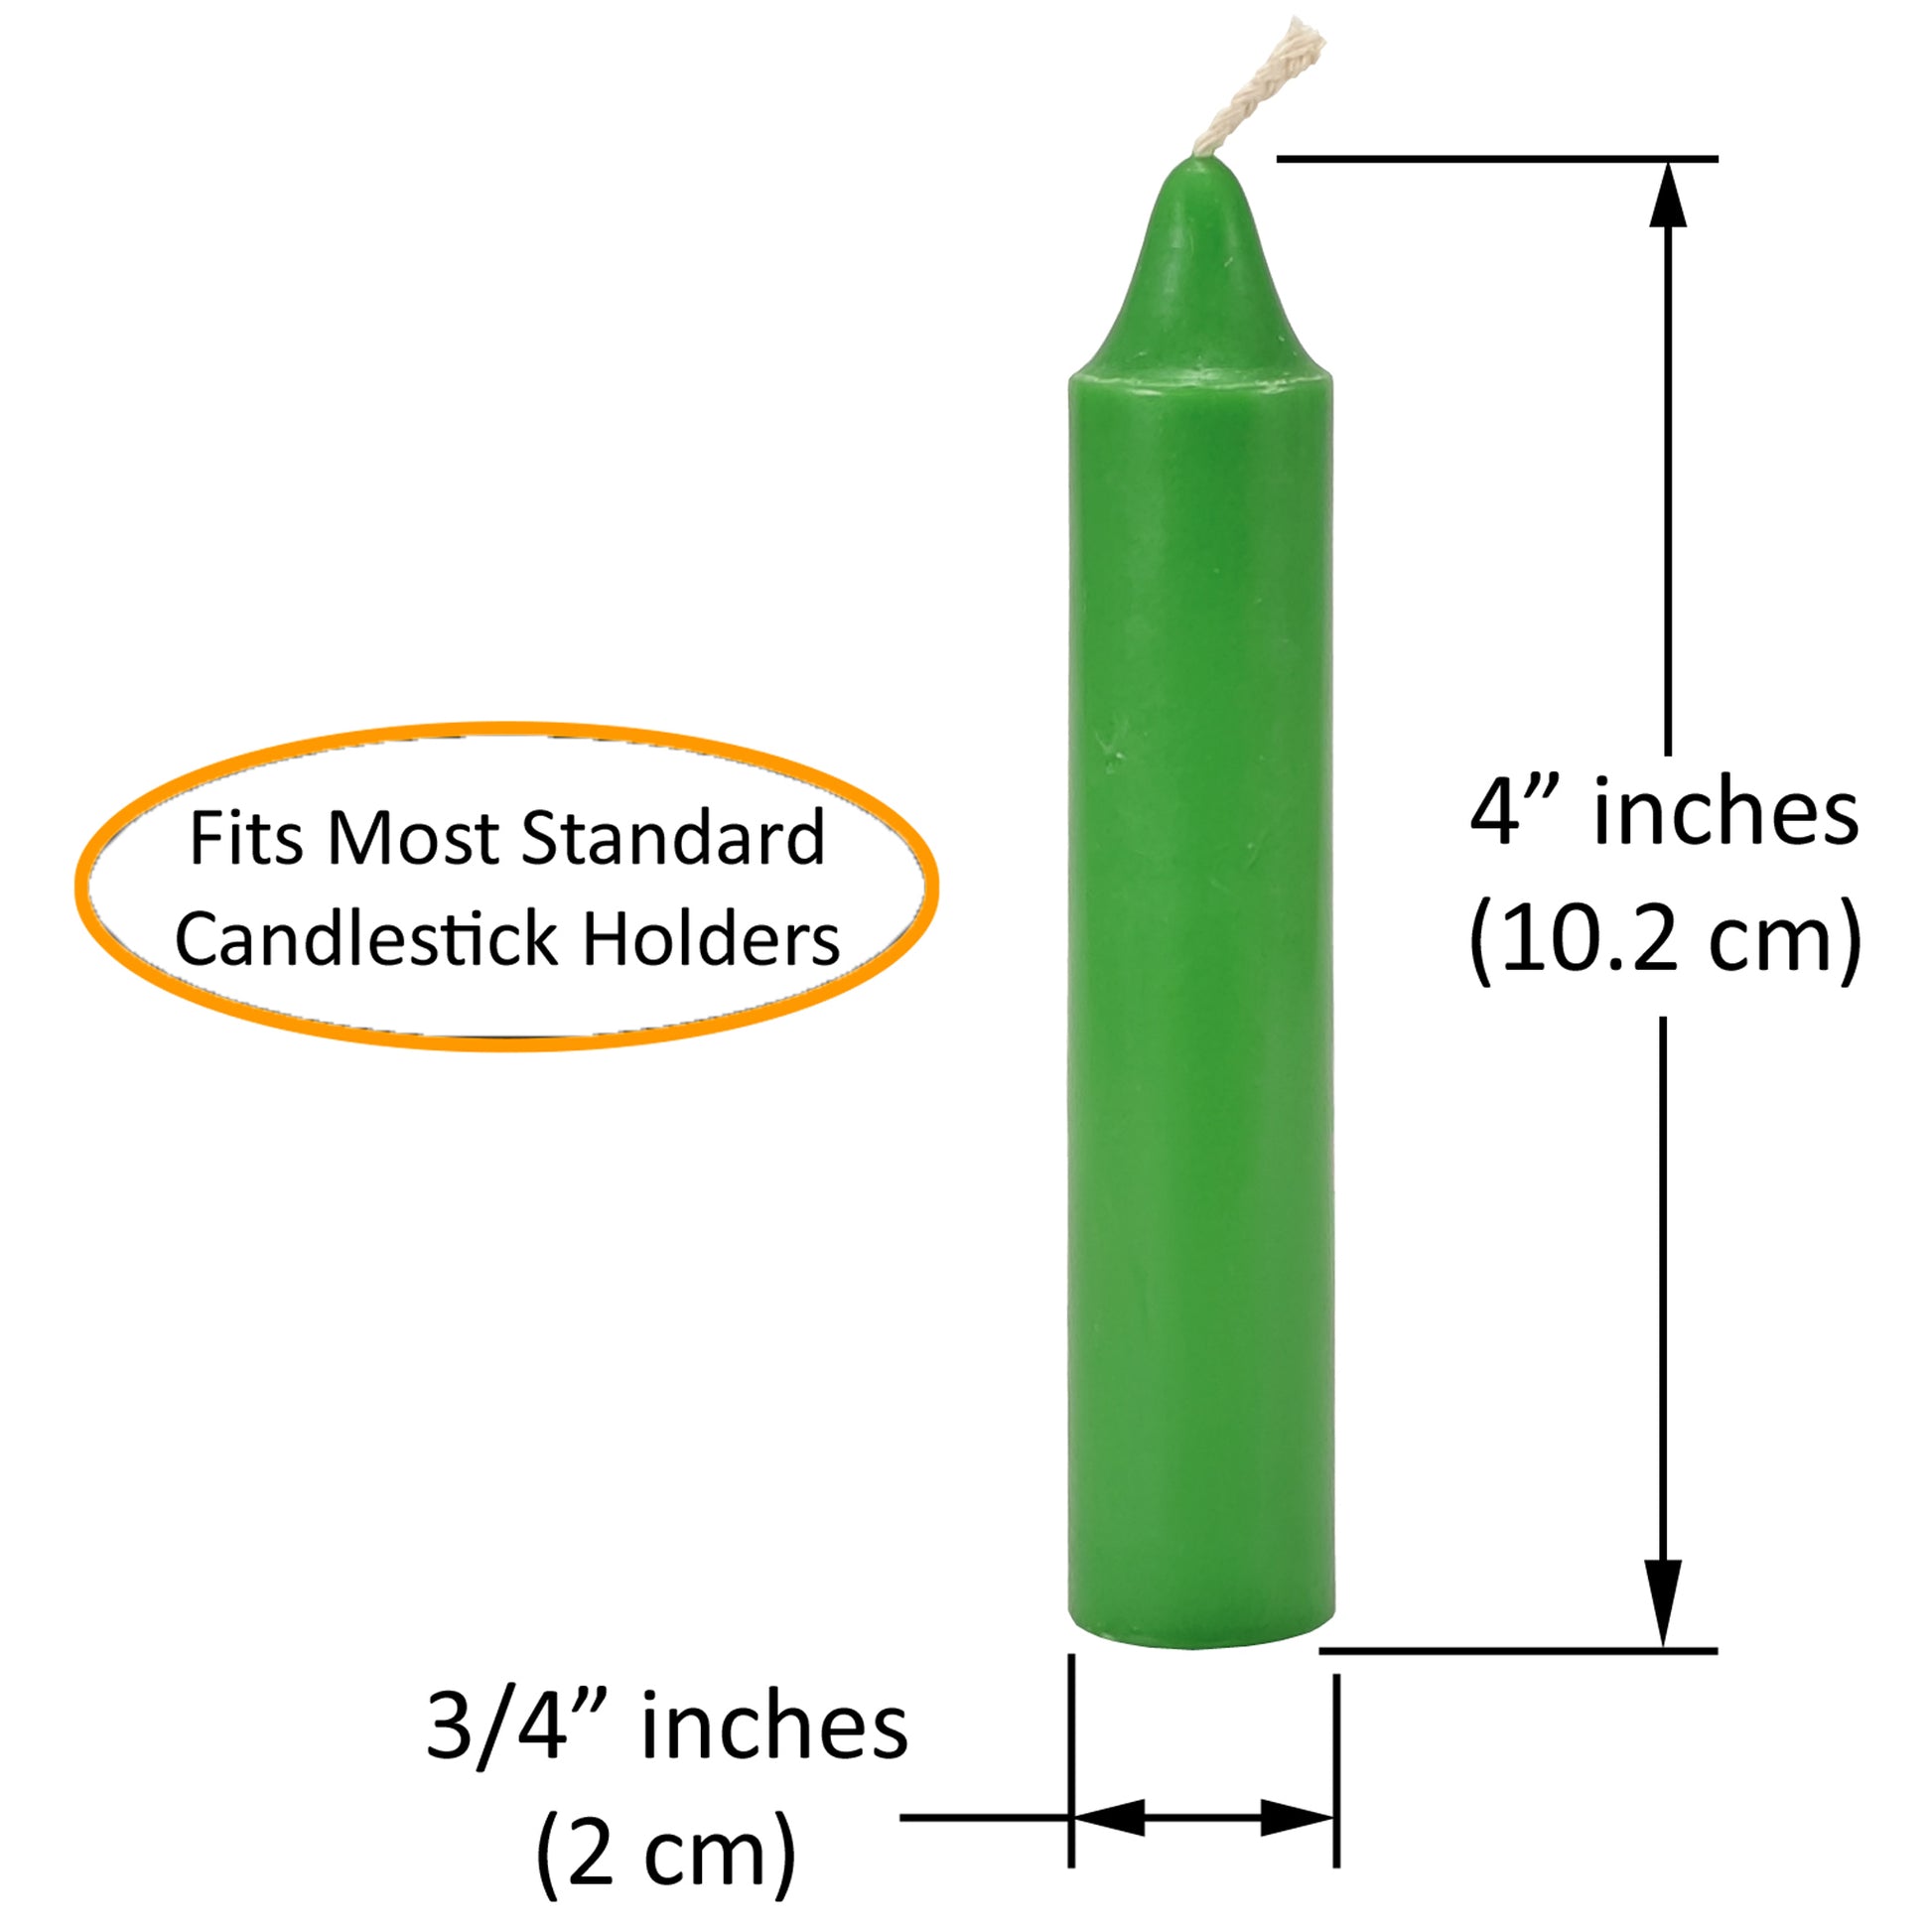 : Infographic, candle dimensions, 4 inches tall, .75 inches diameter.